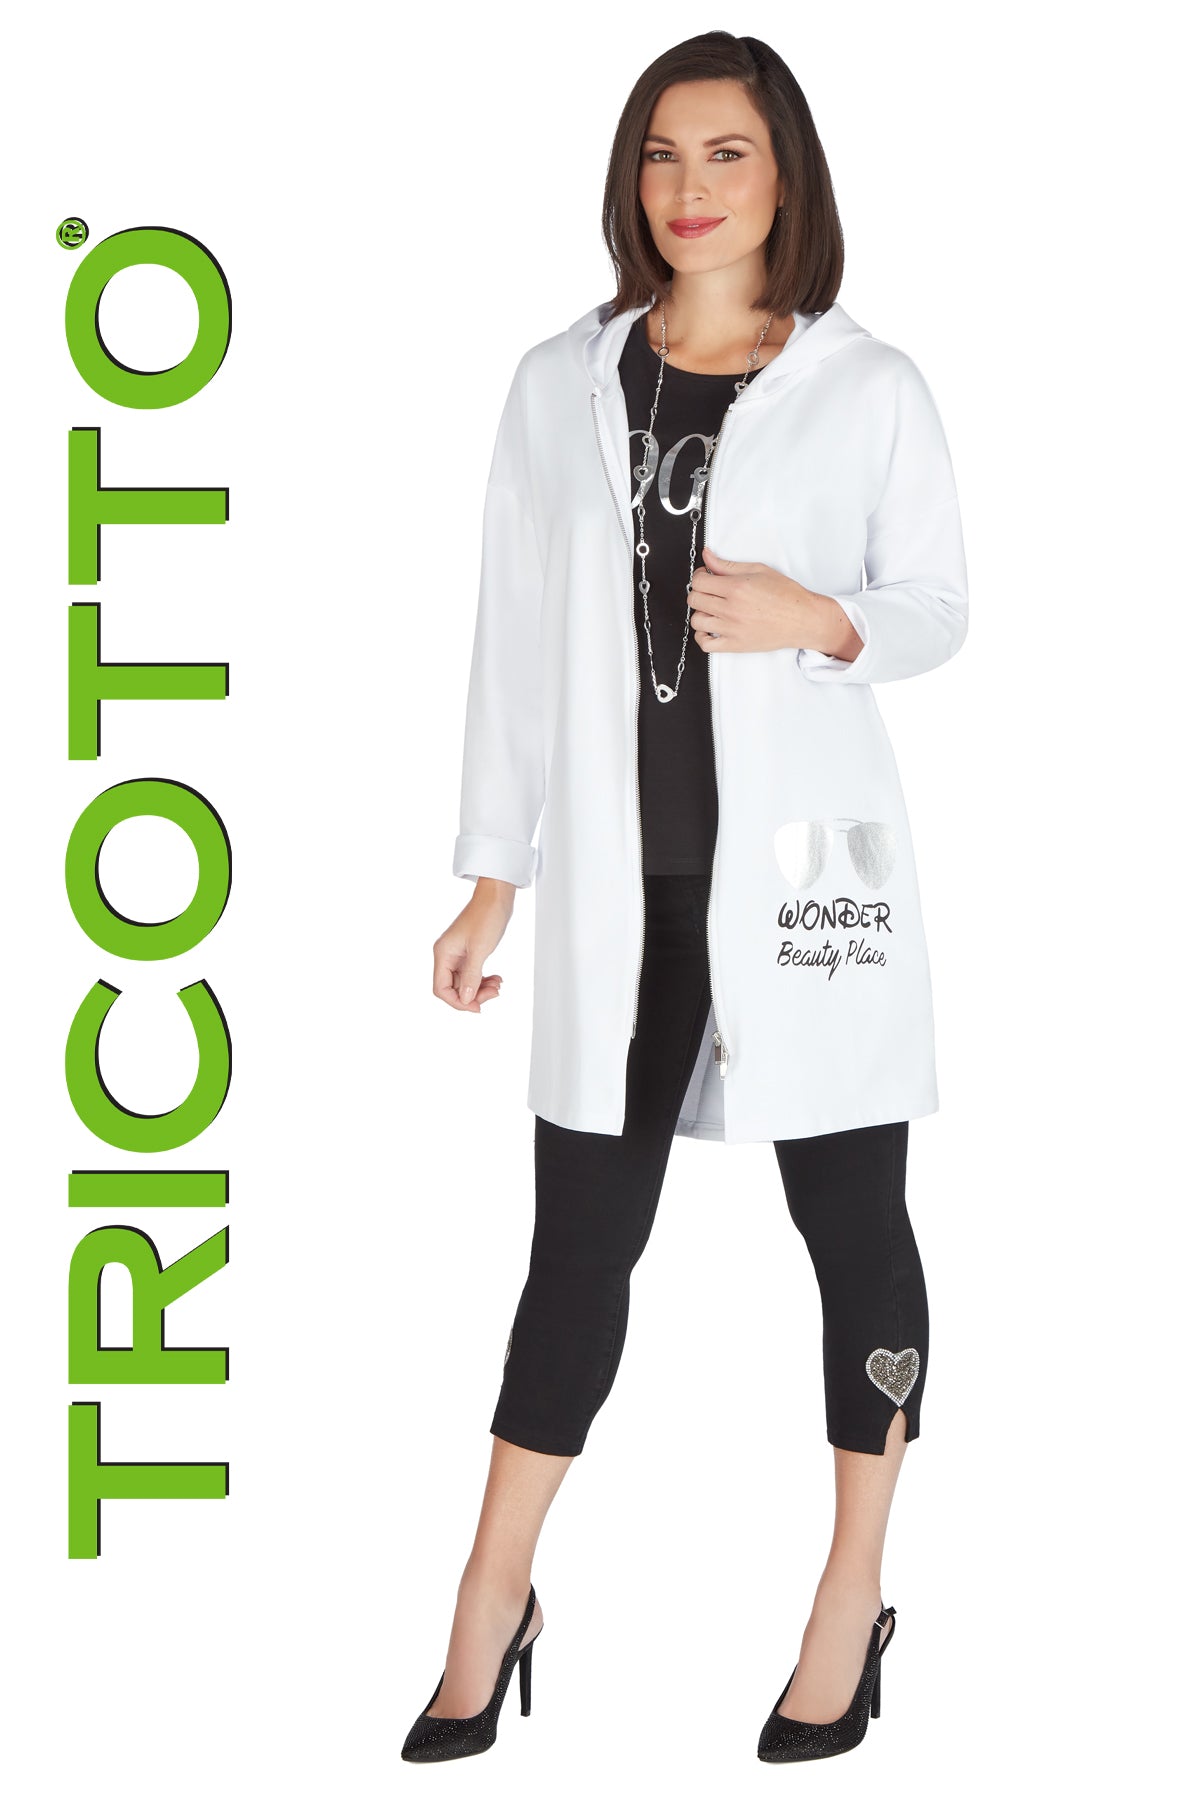 Tricotto Sweaters-Buy Tricotto Sweaters Online Canada-Tricotto Printemps 2022-Tricotto Clothing Quebec-Tricotto Clothing Montreal-Tricotto Online Shop